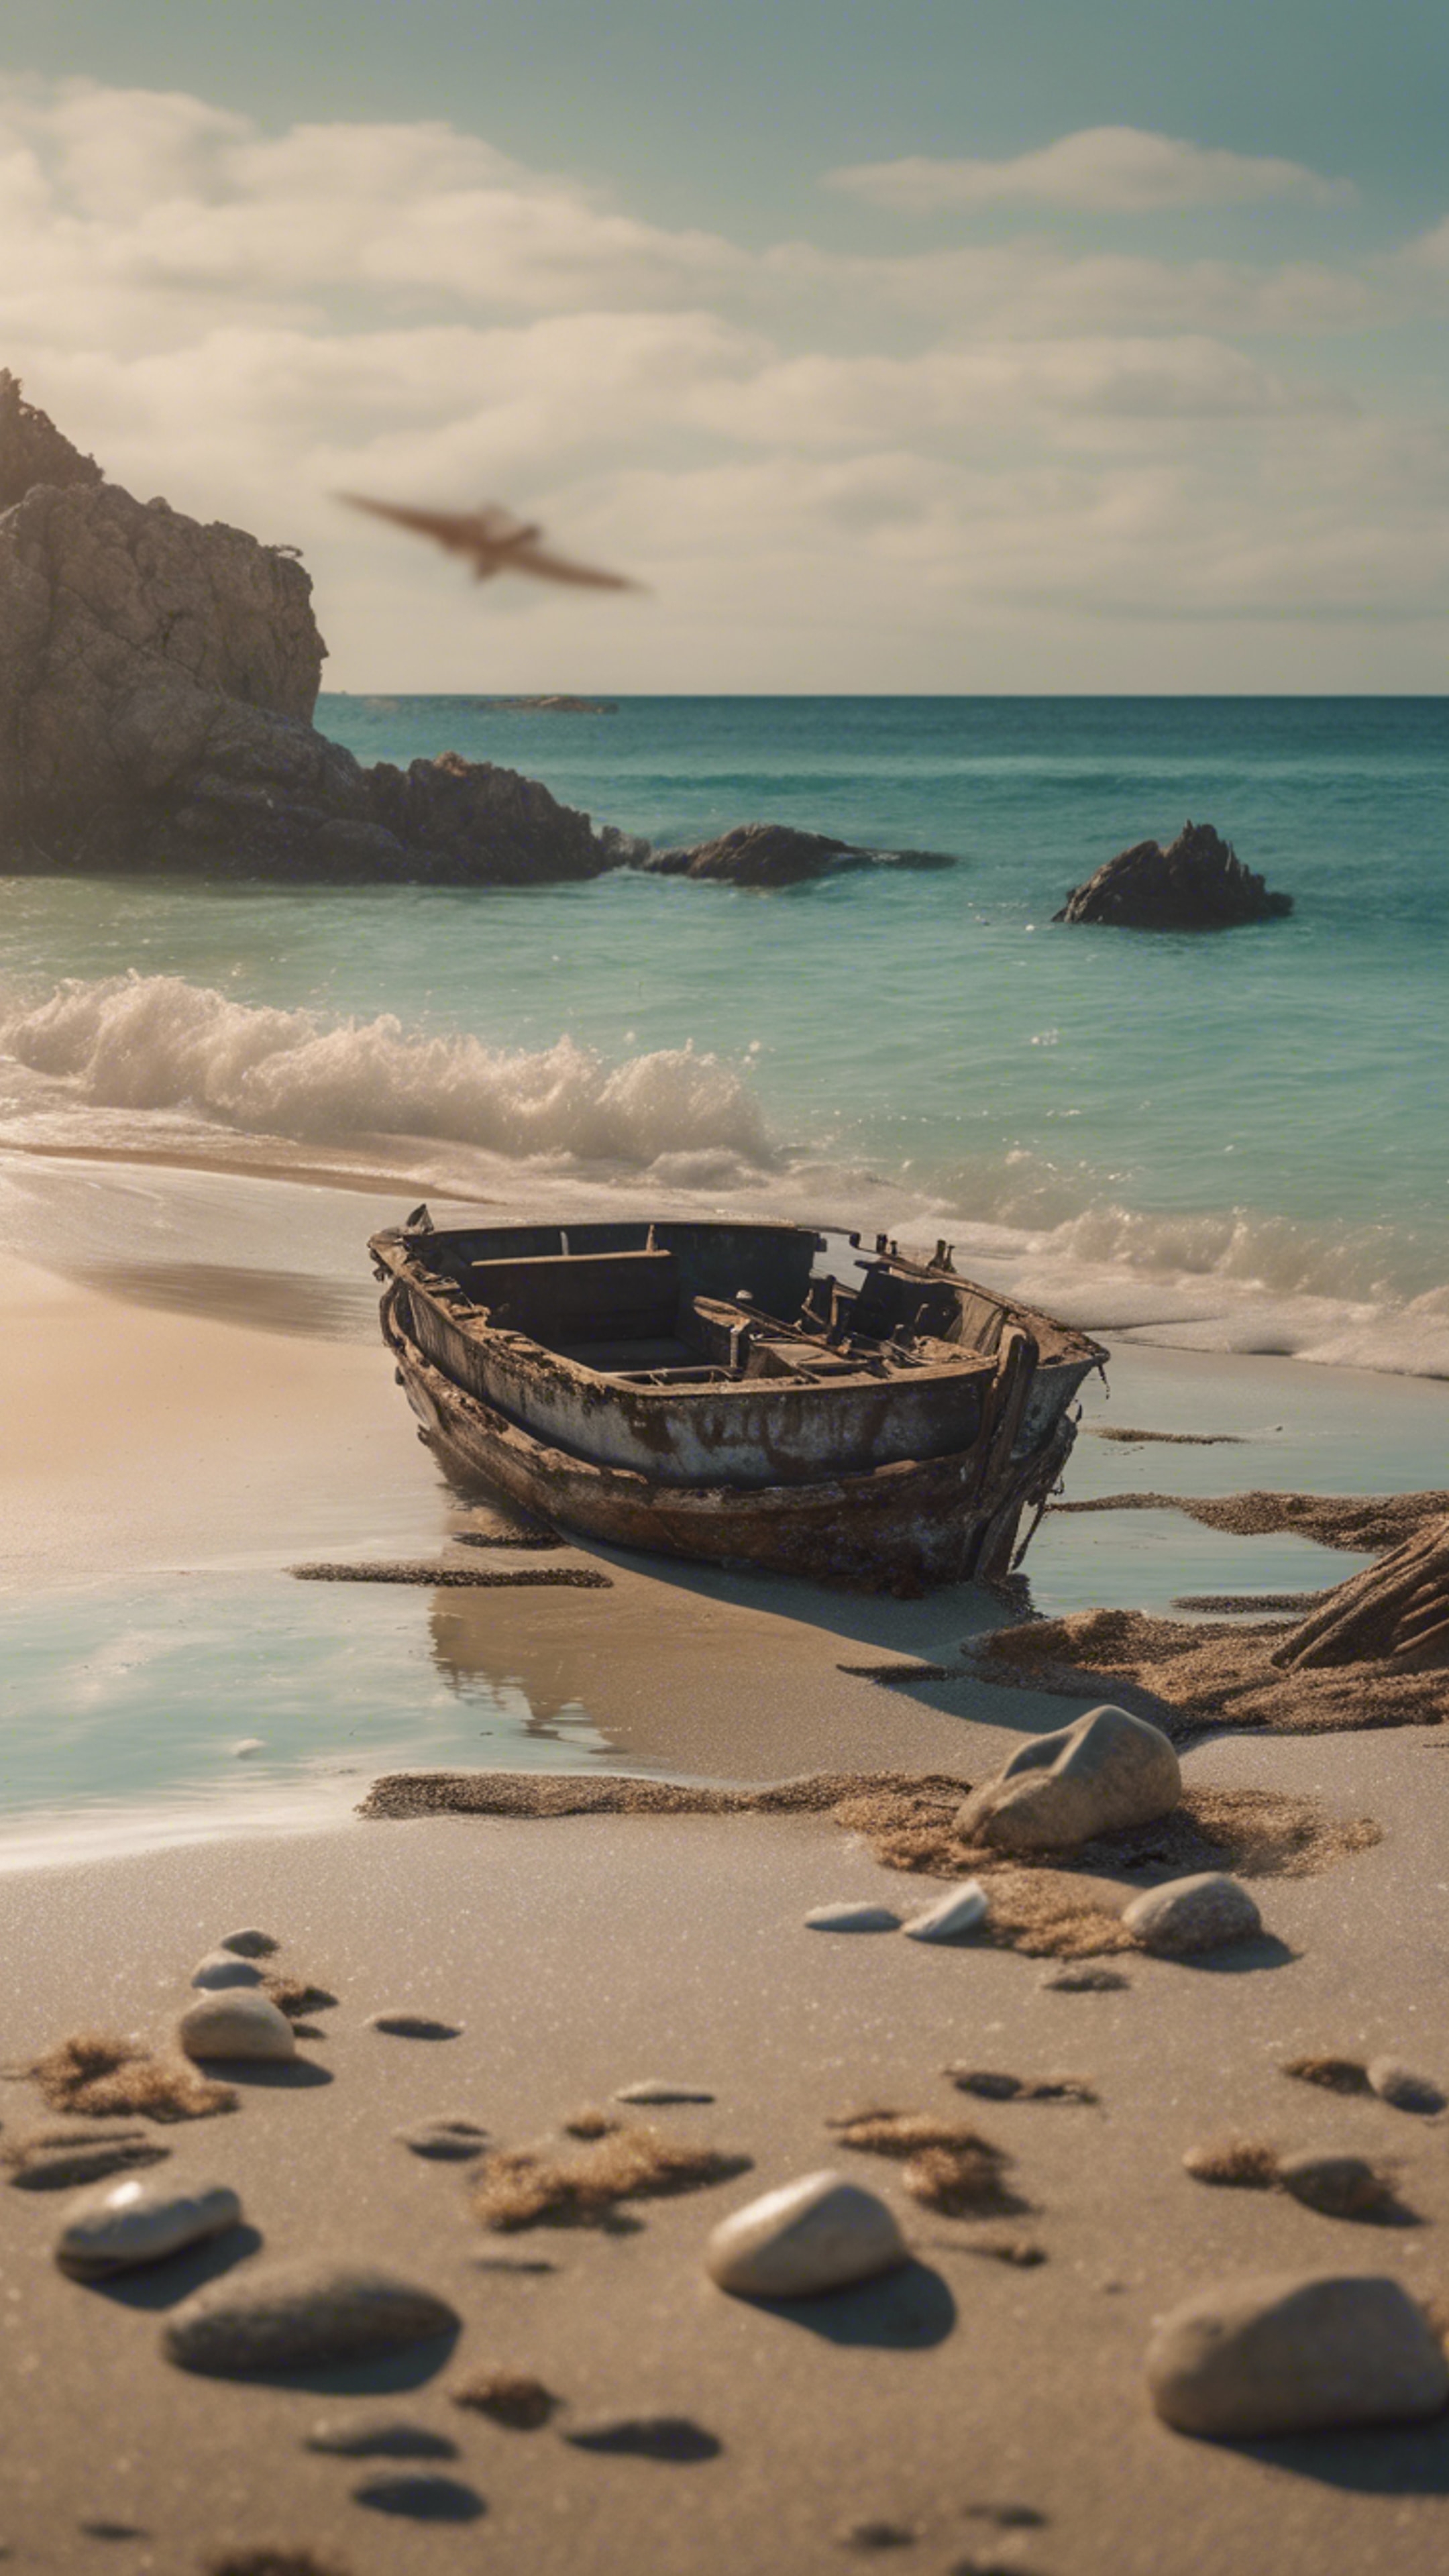 A beautiful beach scene with a sunken shipwreck close to the shore, attracting an array of sea life. Wallpaper[e2d64654cf4d4b428f4d]